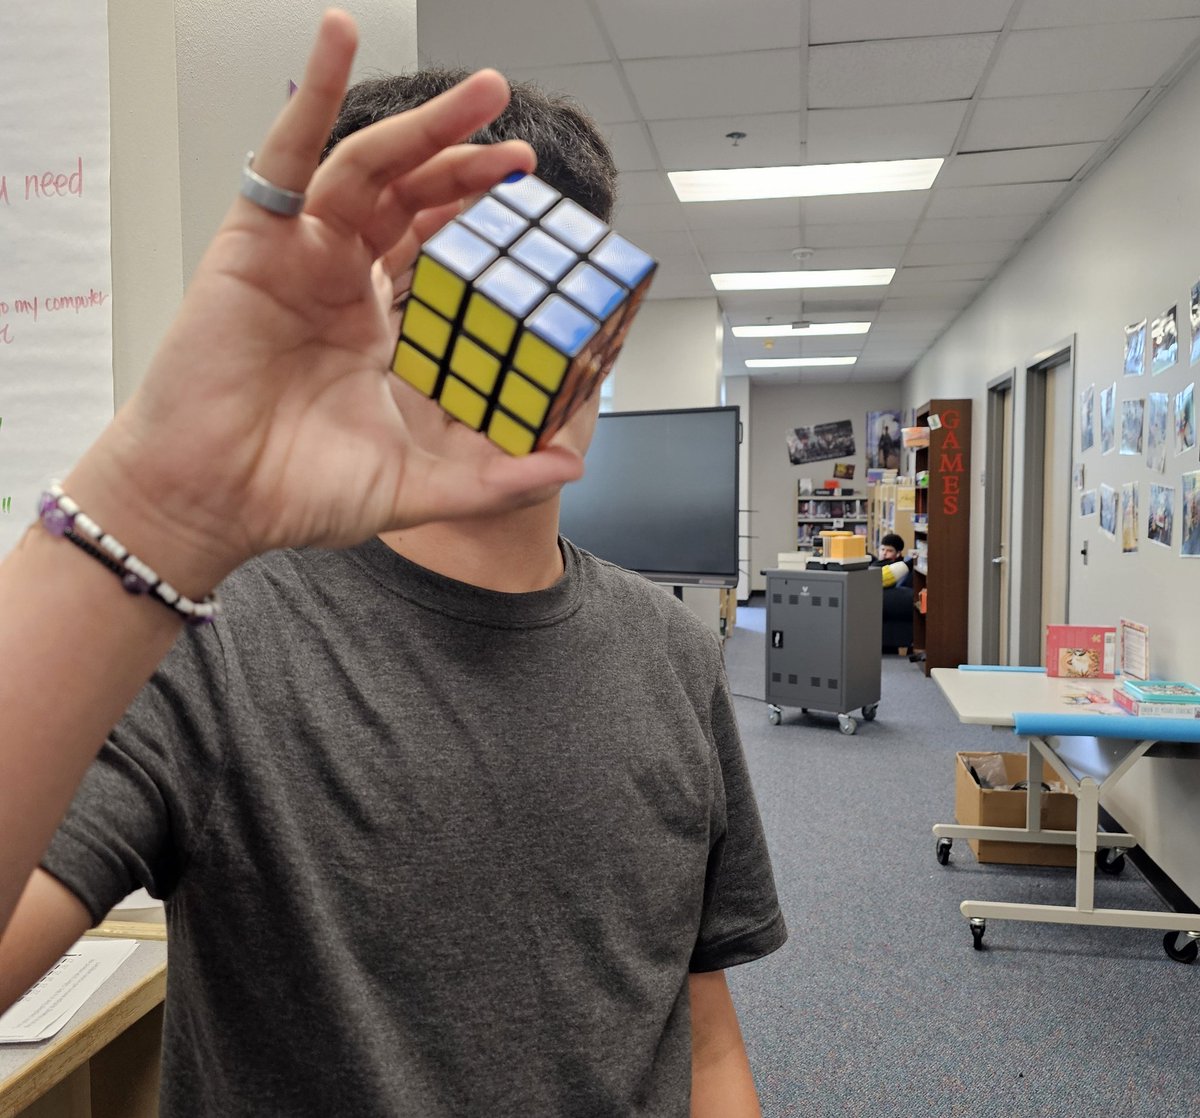 I mentioned that the teachers were struggling with the Rubik's Cube yesterday, and this student decided to show them how it's done. #rubkiscube @Ike9_AISD